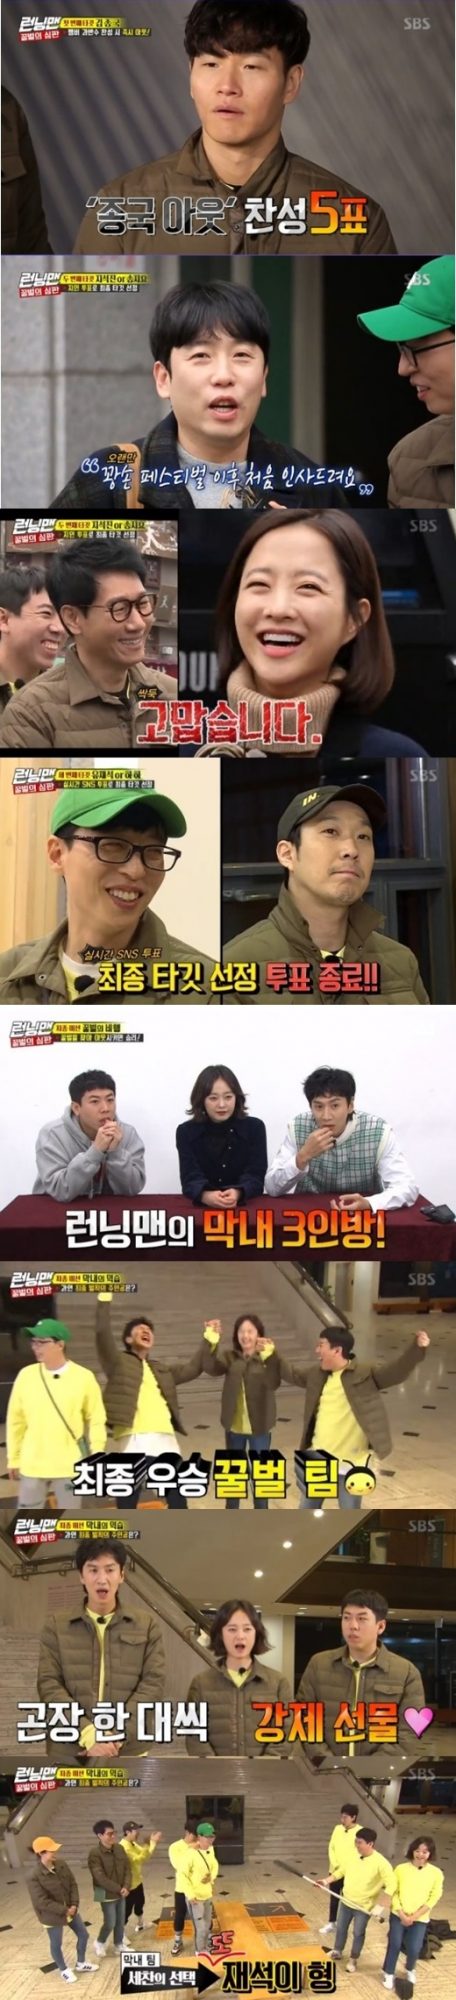 On SBS Running Man, the youngest three won the race and took the top spot in the same time zone of 2049 ratings.According to Nielsen Korea, a ratings agency, Running Man, which aired on the 3rd, recorded a target audience rating of 4% (based on the second part of the audience rating of Seoul Capital Area households), ranking first among the entertainment programs in the same time zone, beating KBS2 Happy Sunday and MBC Masked Wang.The average audience rating was 5.1% in the first part and 6.7% in the second part (based on the audience rating of Seoul Capital Area households), and the highest audience rating per minute rose to 7.6%.On the show, the Bee Judge Race was held.The first singer Kim Jong-kook was put on the bench, and the In-N-Out Burger vote resulted in five votes in favor and two votes in opposition.Kim Jong-kook was absurd about the results of the vote, but the members laughed at each other pretending not to be themselves.Song Ji-hyo and Ji Suk-jin were put on the bench, and actors Park Bo-young, comedian Nam Chang-hee and Empire appeared as entertainer judges.Park Bo-young has revealed his face to the public with his accidental surprise appearance, but he has been impressed with his humiliating beauty.Park Bo-young chose Ji Suk-jin as the person to make In-N-Out Burger with Nam Chang-hee and Emperor, saying, Song Ji-hyo is like a sister, and Ji Suk-jin is just a king-knock.The members who were later determined to be the final target through real-time SNS voting among Haha and Yoo Jae-Suk were Yoo Jae-Suk; the members held a race to catch bees.In this process, fake honey bee Yoo Jae-Suk was removed.The 15 Minute Race began, and the Bee Yang Se-chan was eliminated, and the members found out the identity of the Bee was the youngest line trio.Kim Jong-kook, Song Ji-hyo and Haha struggled, but Lee Kwang-soo kept the young team victory and pointed out Yoo Jae-Suk as a penalty member.Yoo Jae-Suk was baptized with a prickly plight; the scene had a top-rated 7.6% per minute, taking the best one minute.